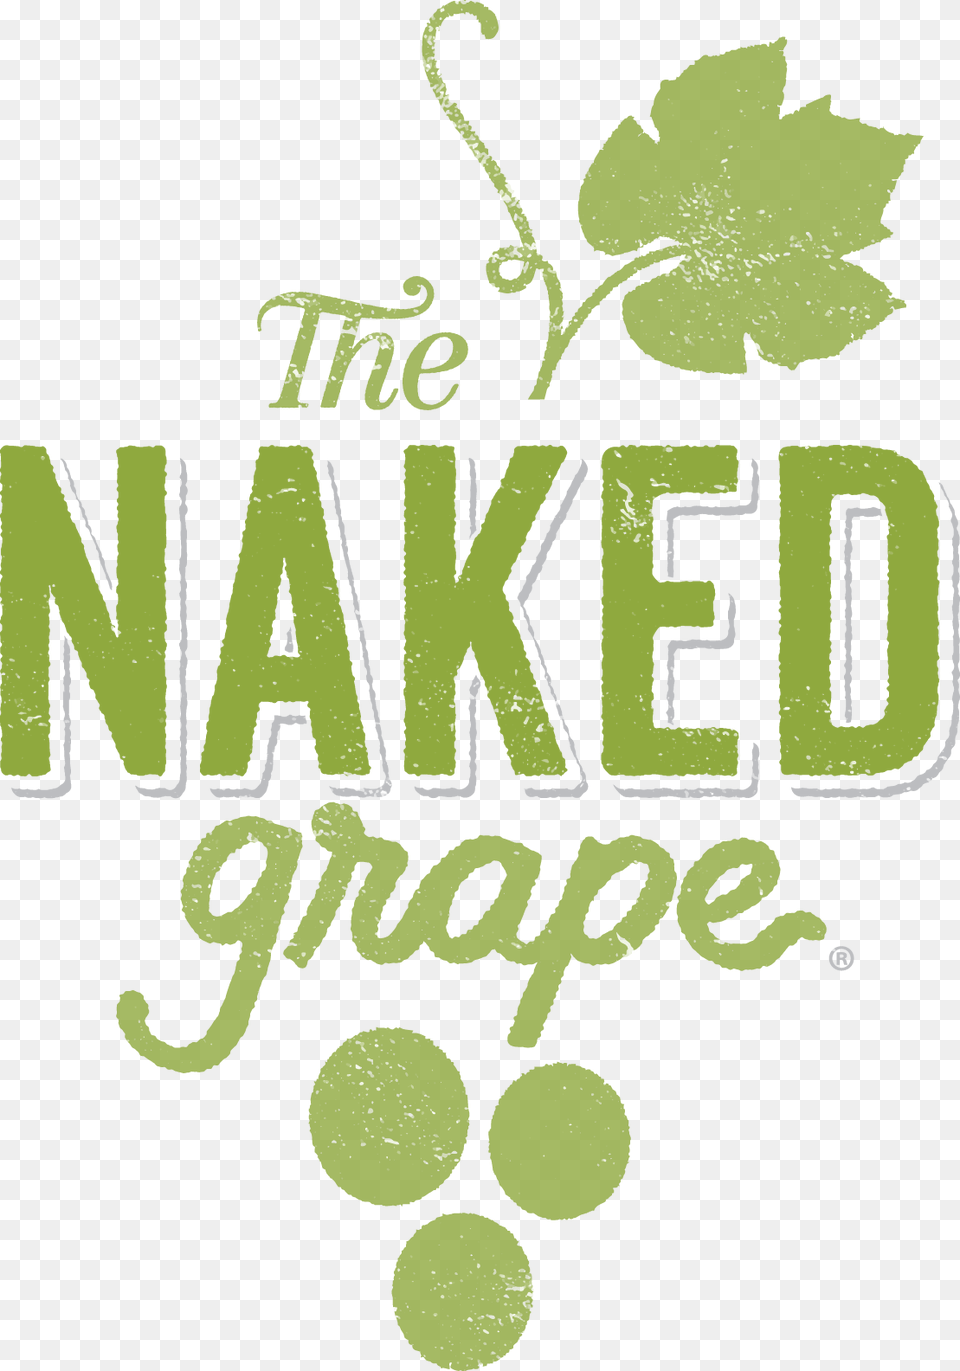 The Naked Grape California Pinot Grigio Once Again Naked Grape Wine Logo, Green, Plant, Leaf, Vine Png Image